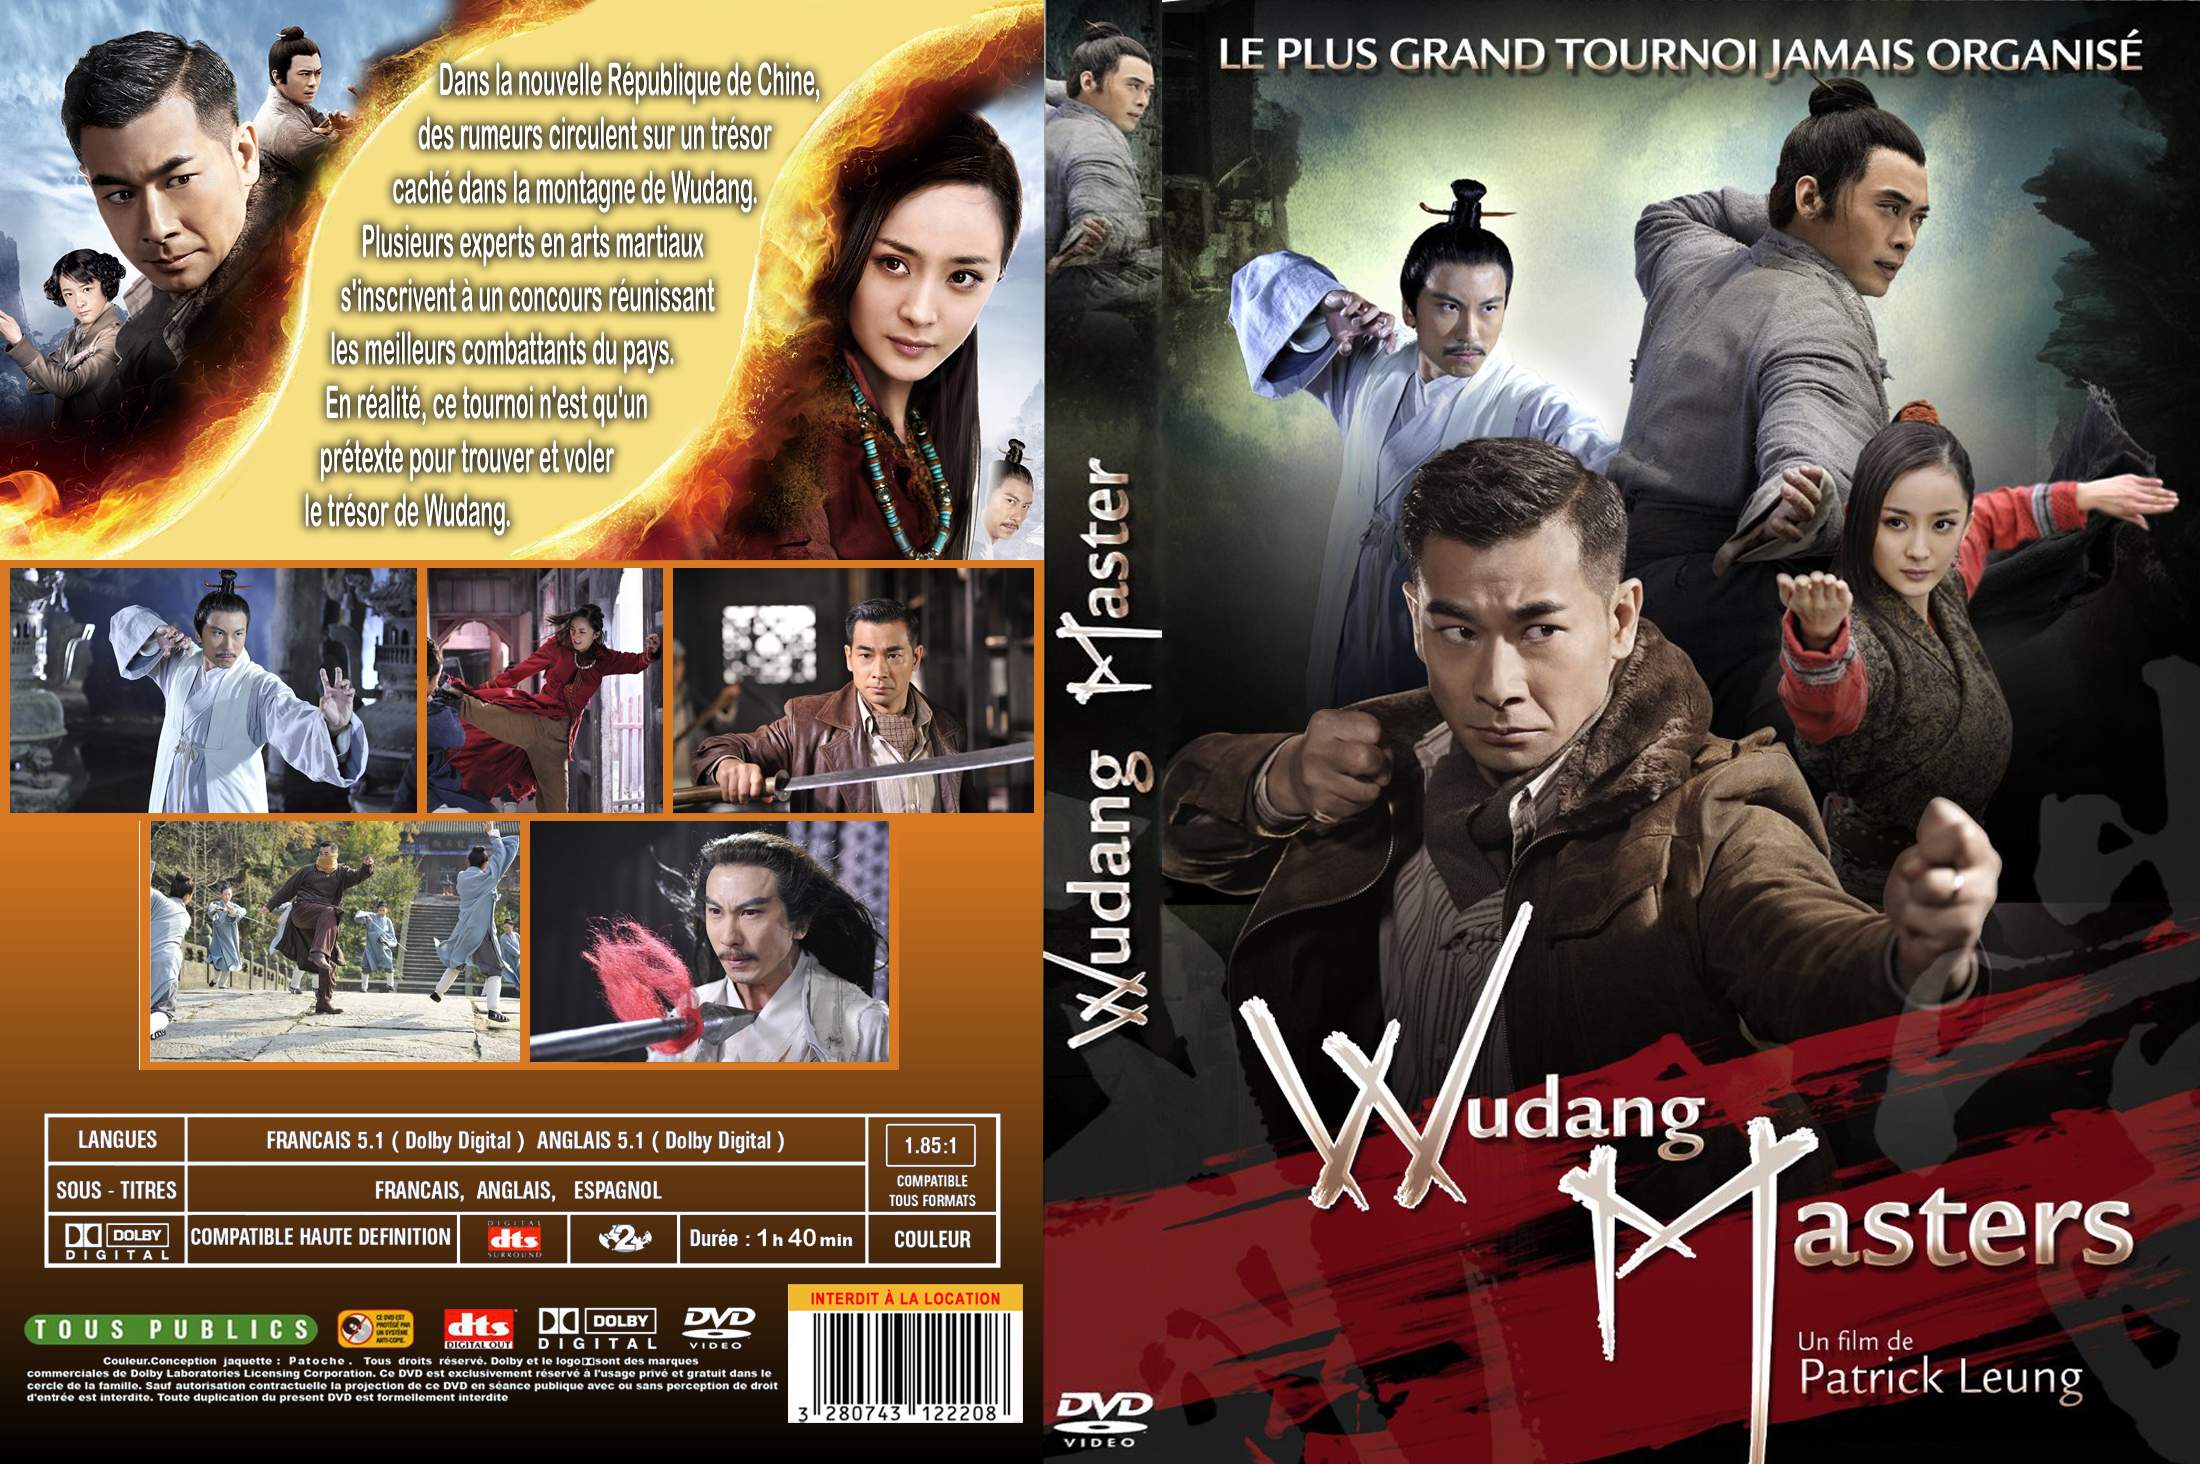 Jaquette DVD Wudang Masters custom